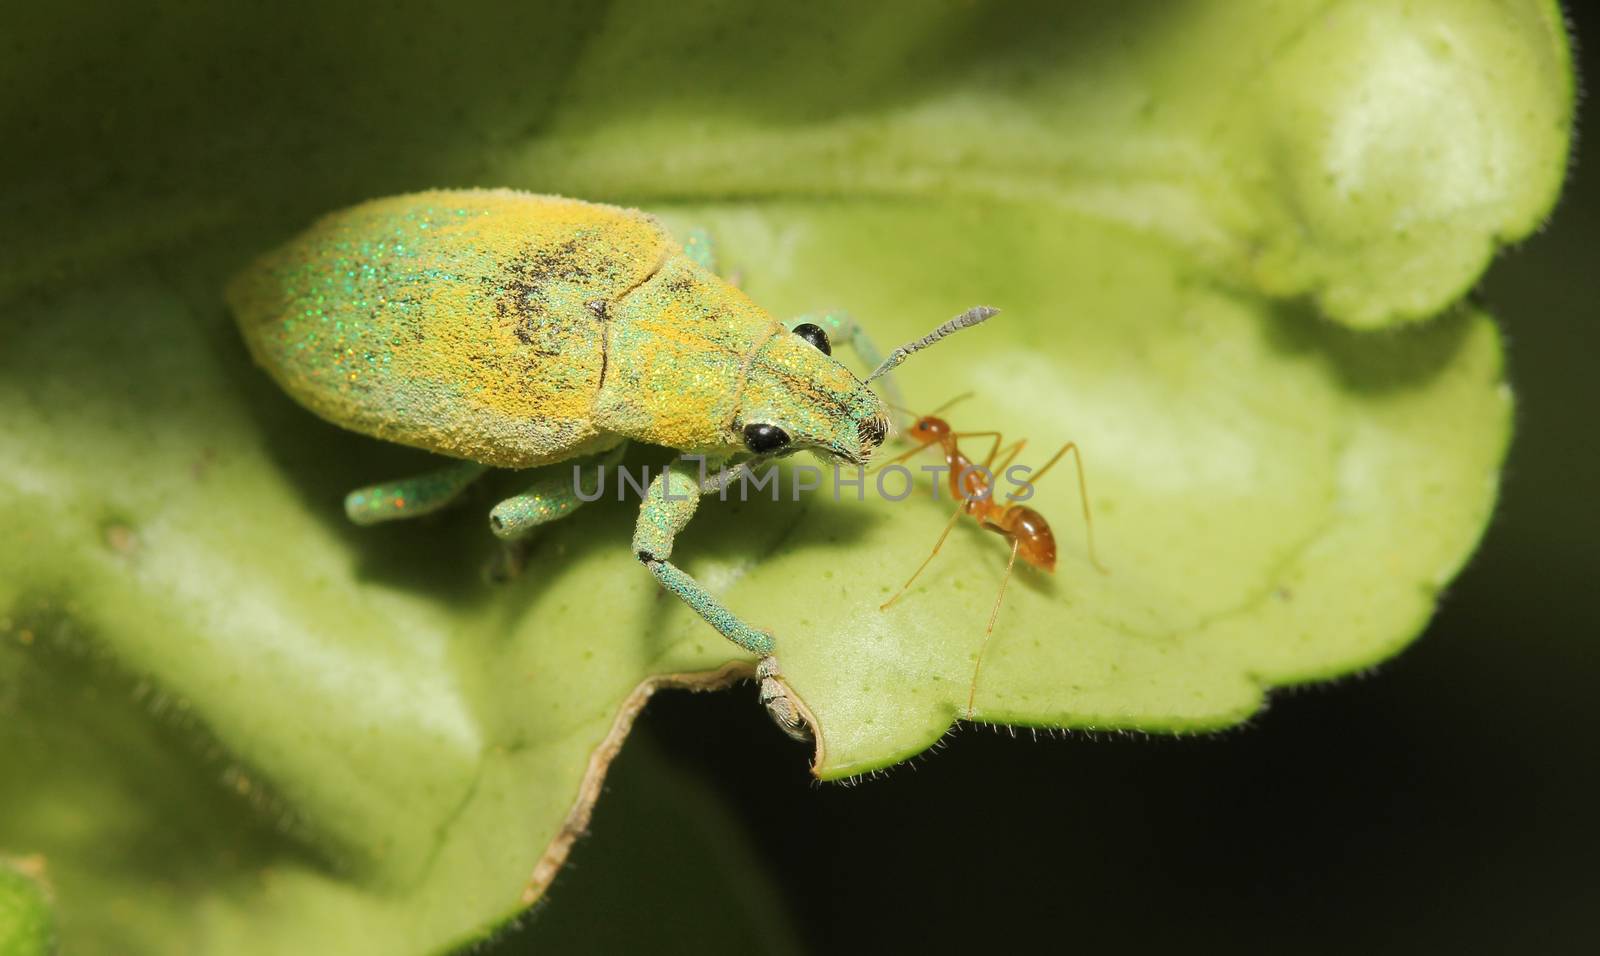 close up green weevil on leaf in garden by pumppump